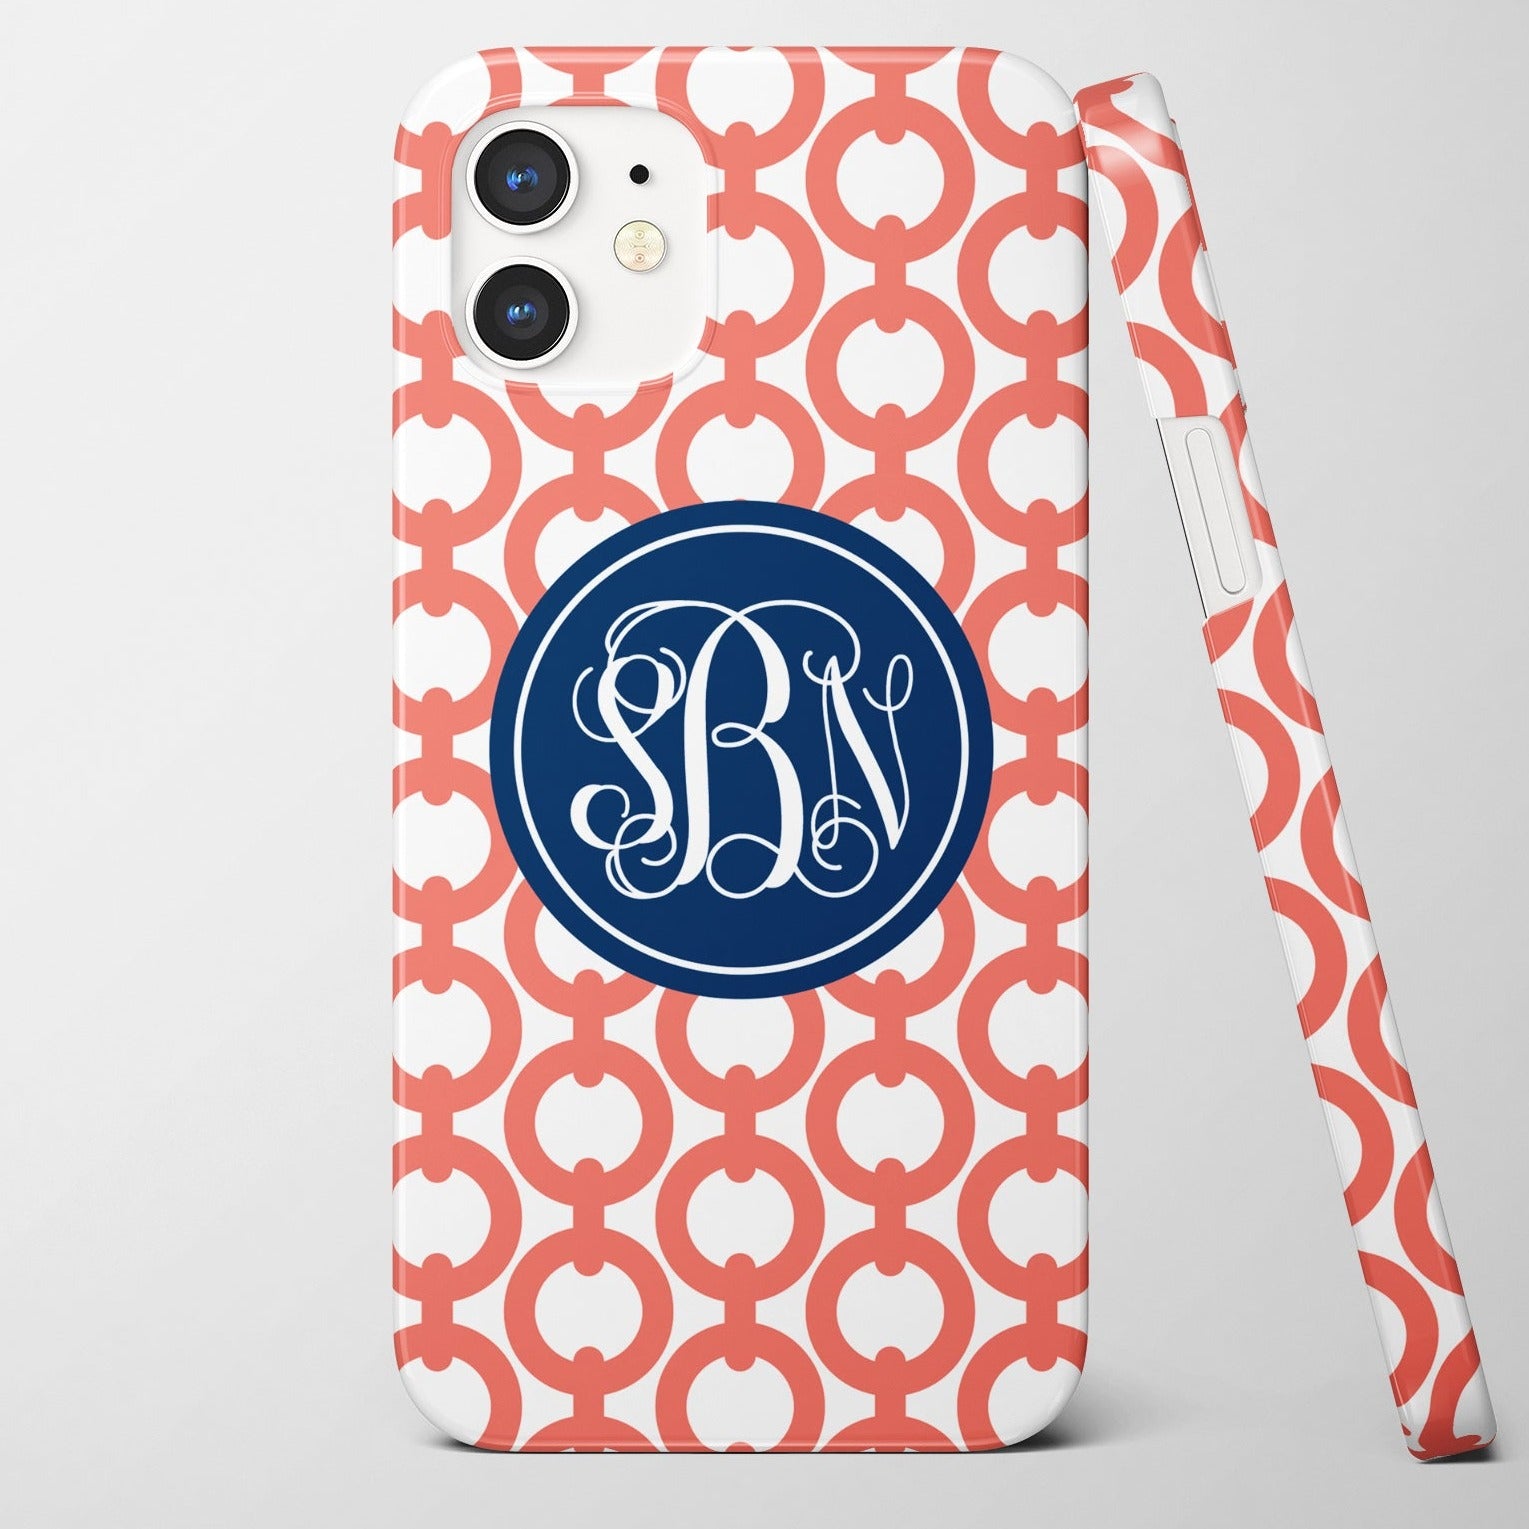 Rings iPhone monogrammed case from Pipsy, choose any color combination